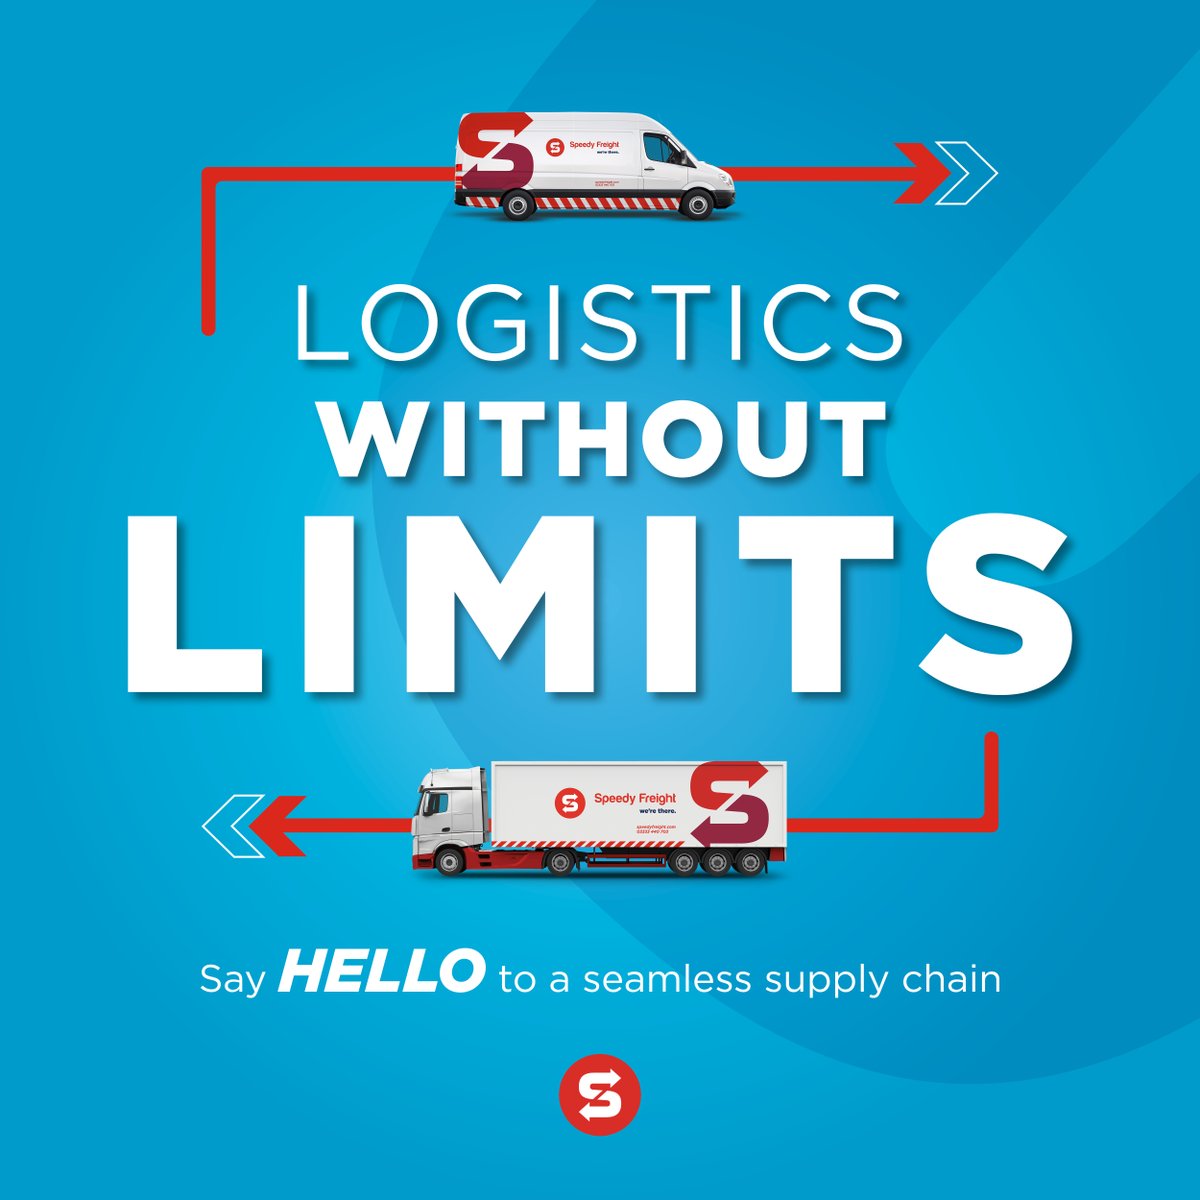 With our comprehensive range of transport services, we’re ready to tackle all your delivery challenges, no matter how complex. ➡️ Discover our range of services and get in touch for a free logistics review: hubs.la/Q02vG9gZ0